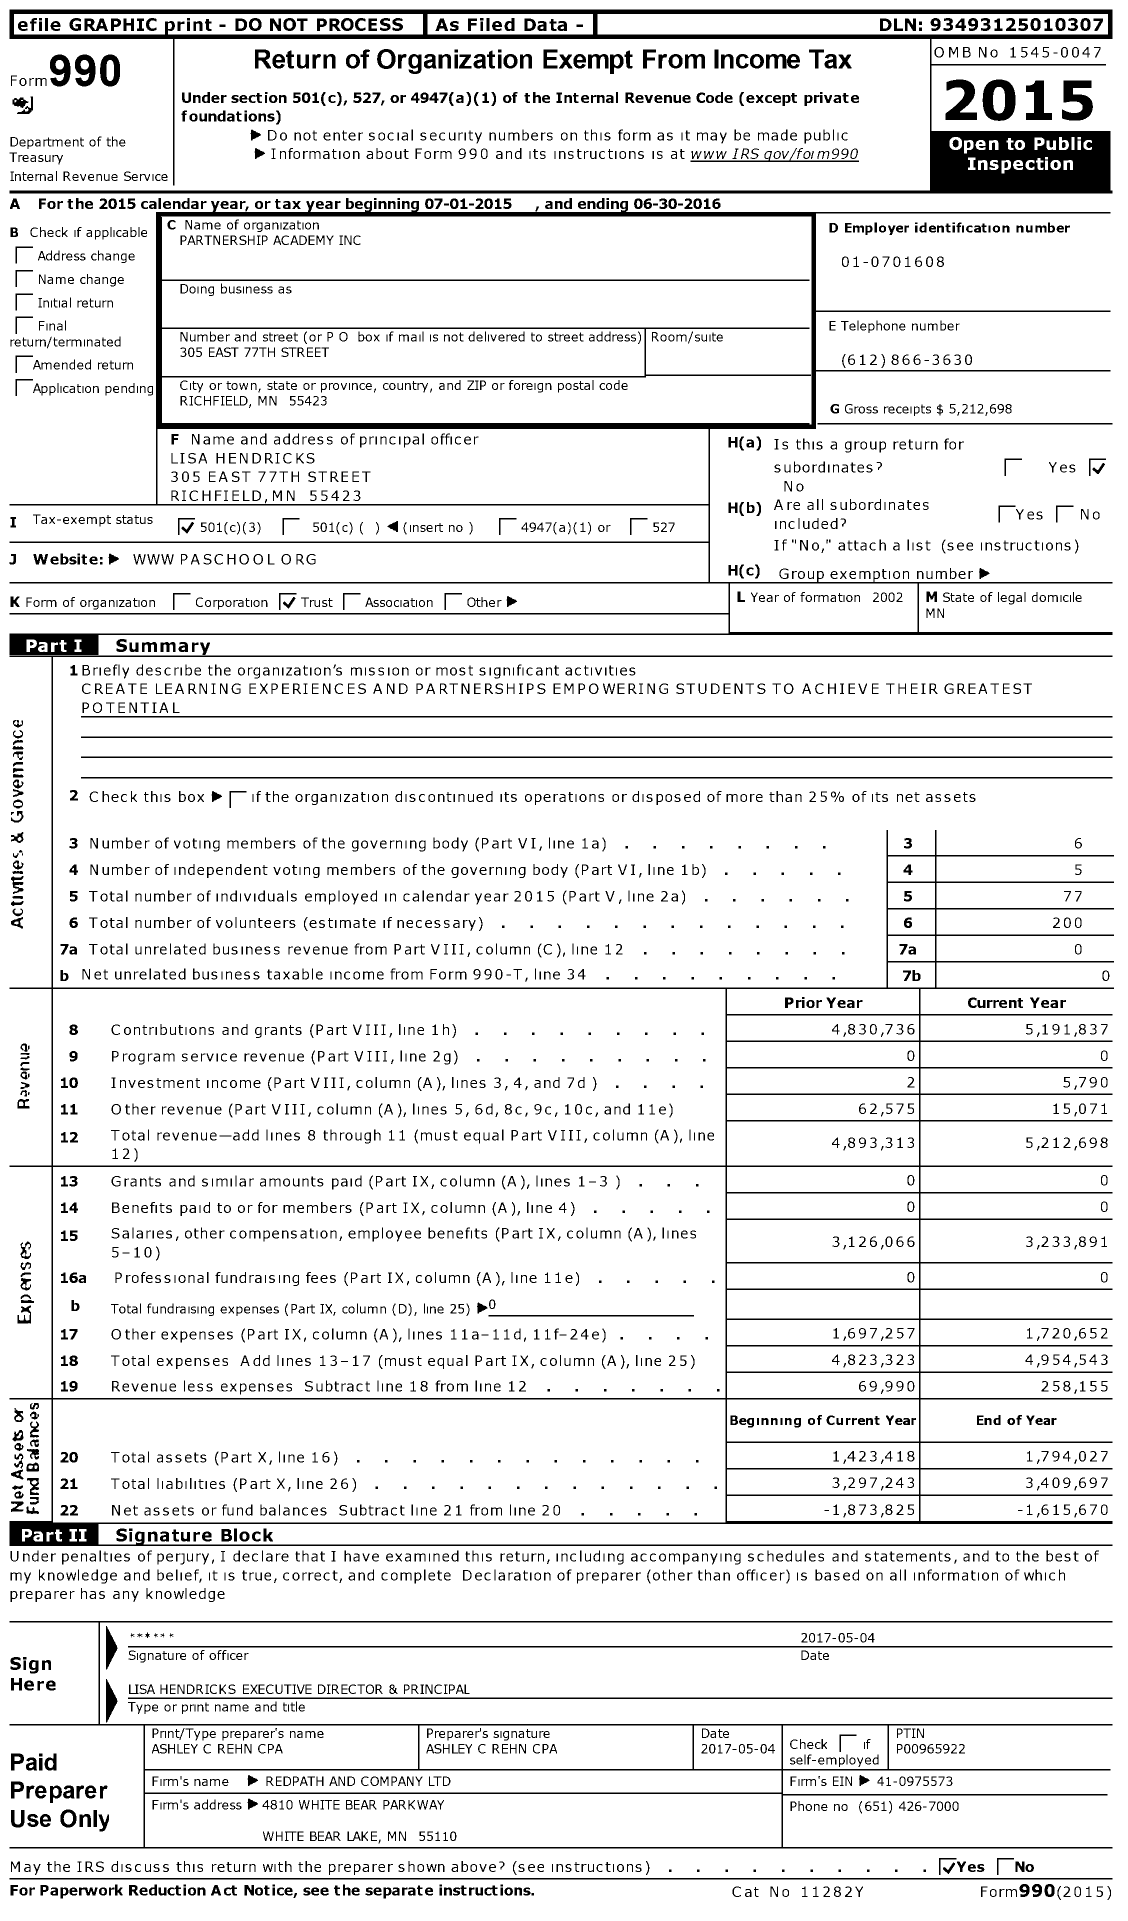 Image of first page of 2015 Form 990 for Partnership Academy